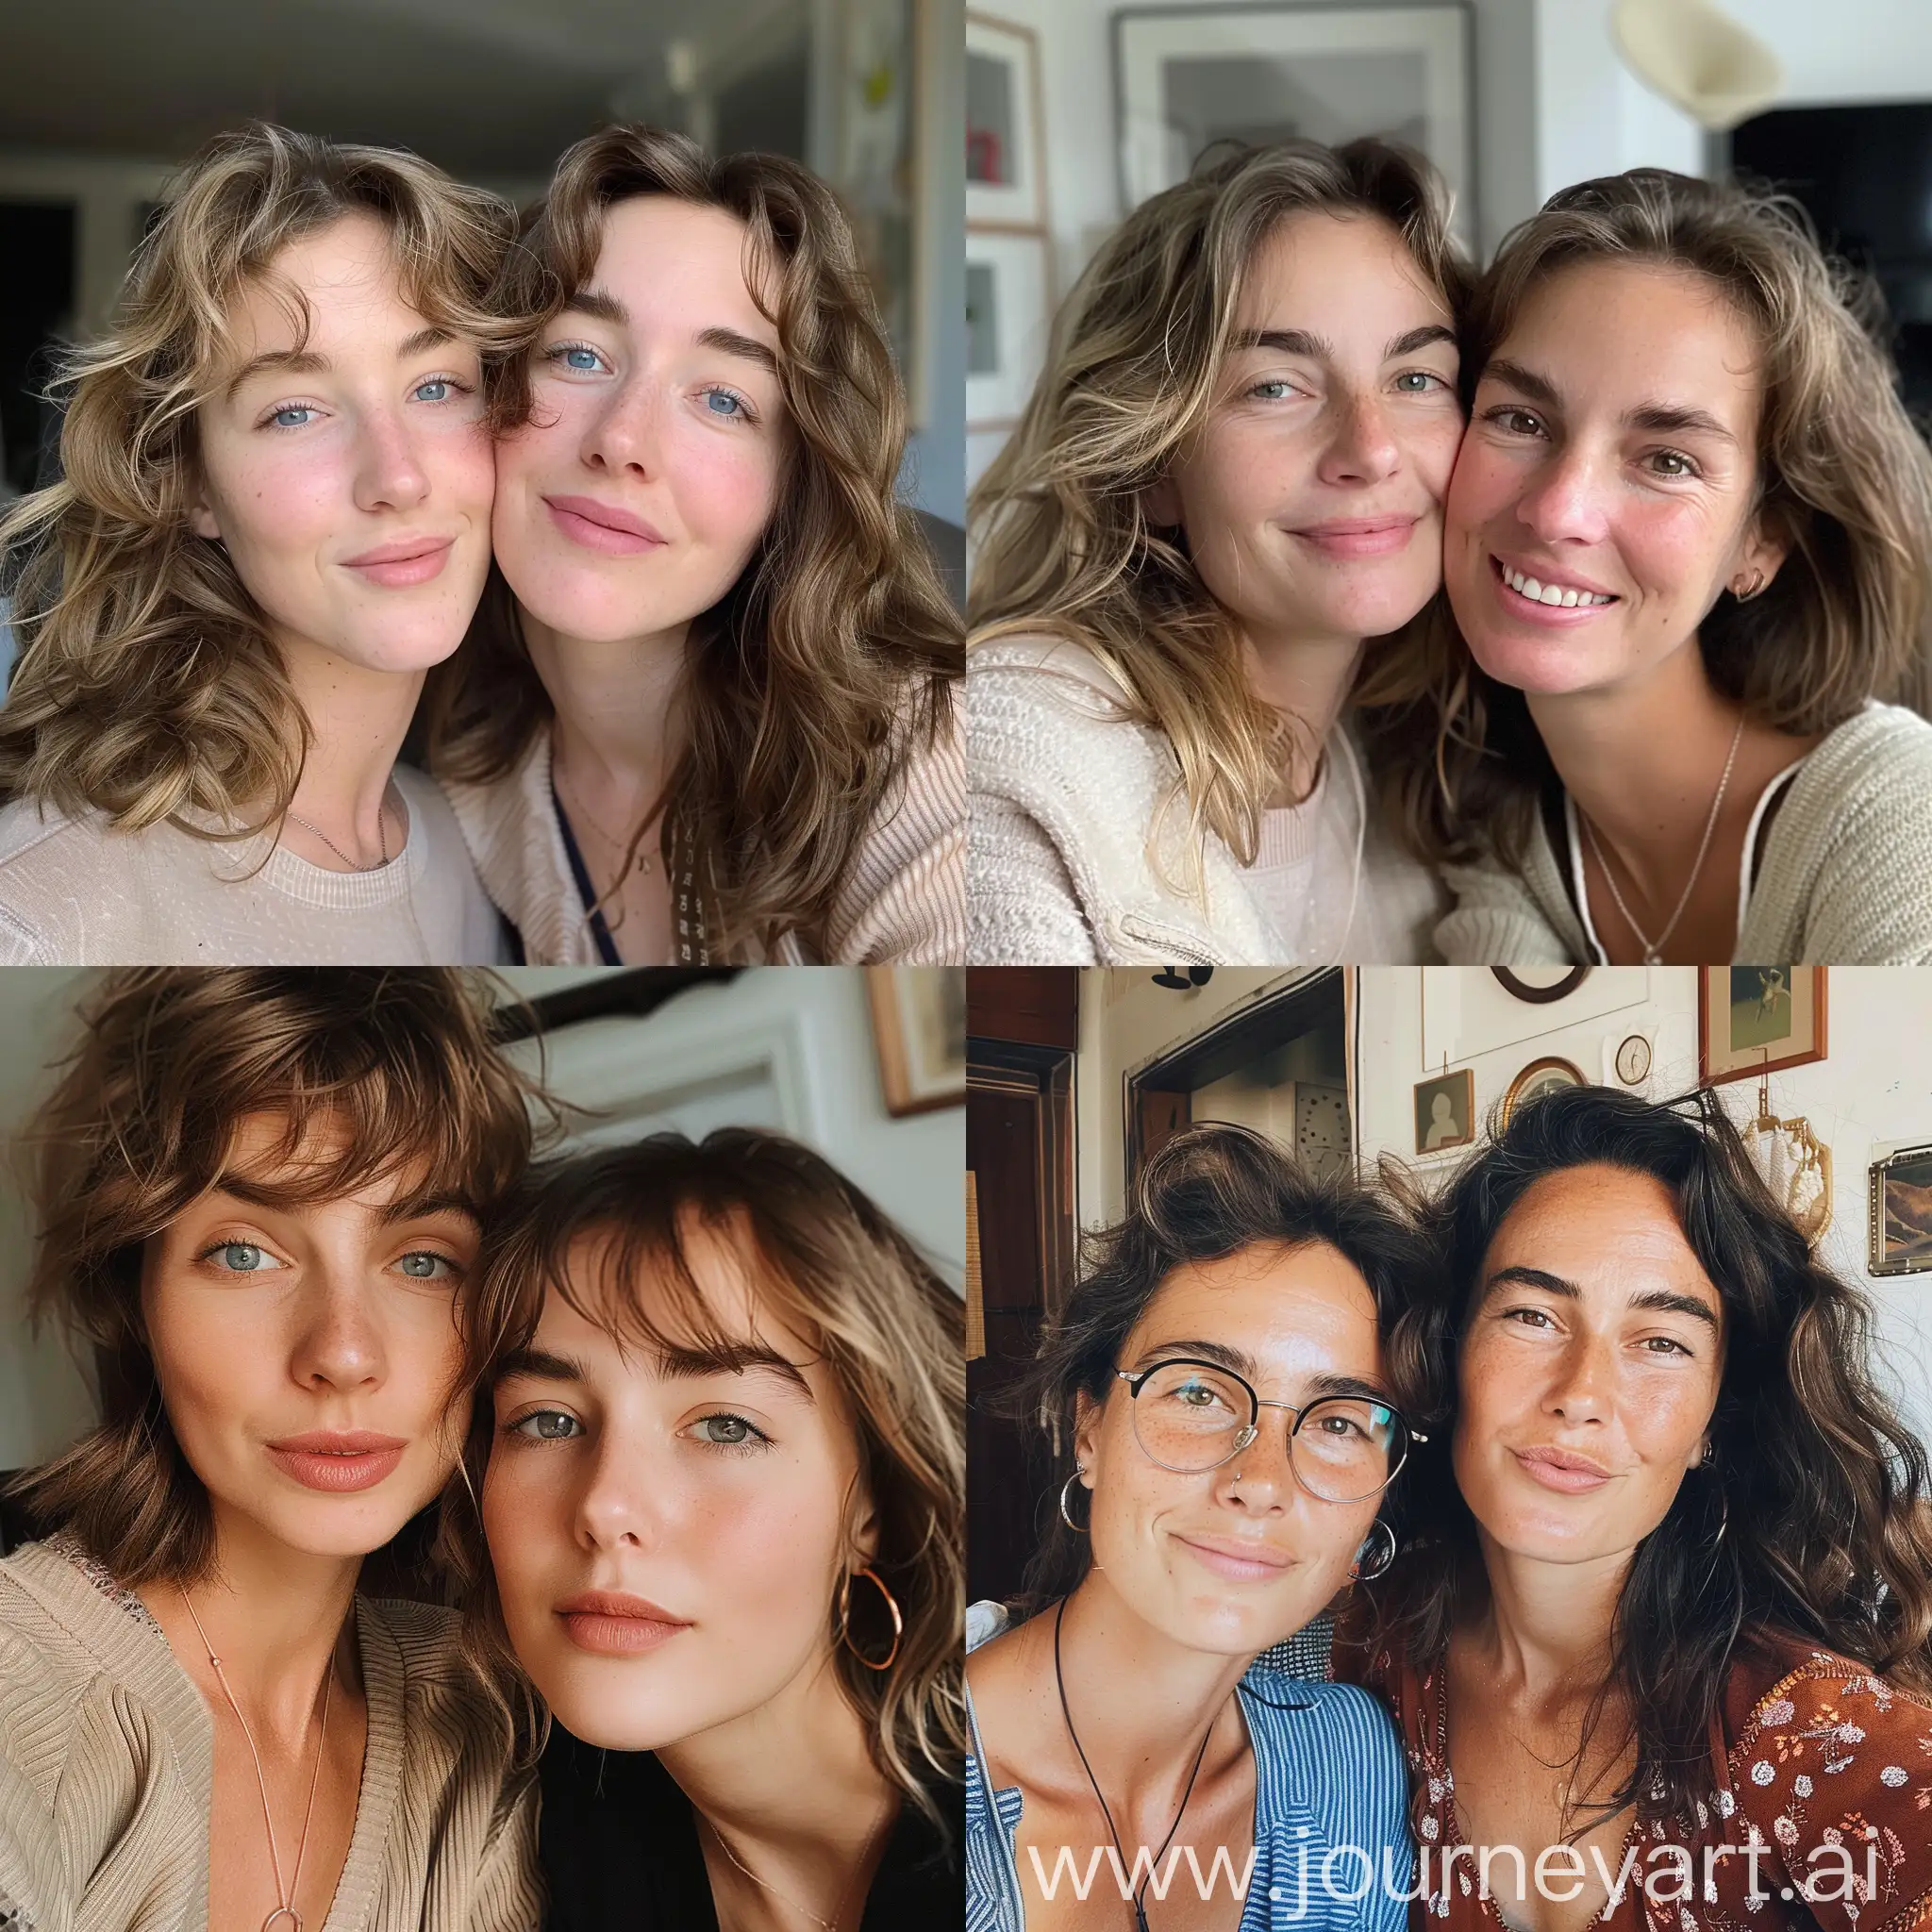 Mother-and-Daughter-Selfie-in-NYC-Apartment-Adorable-and-Happy-Moment